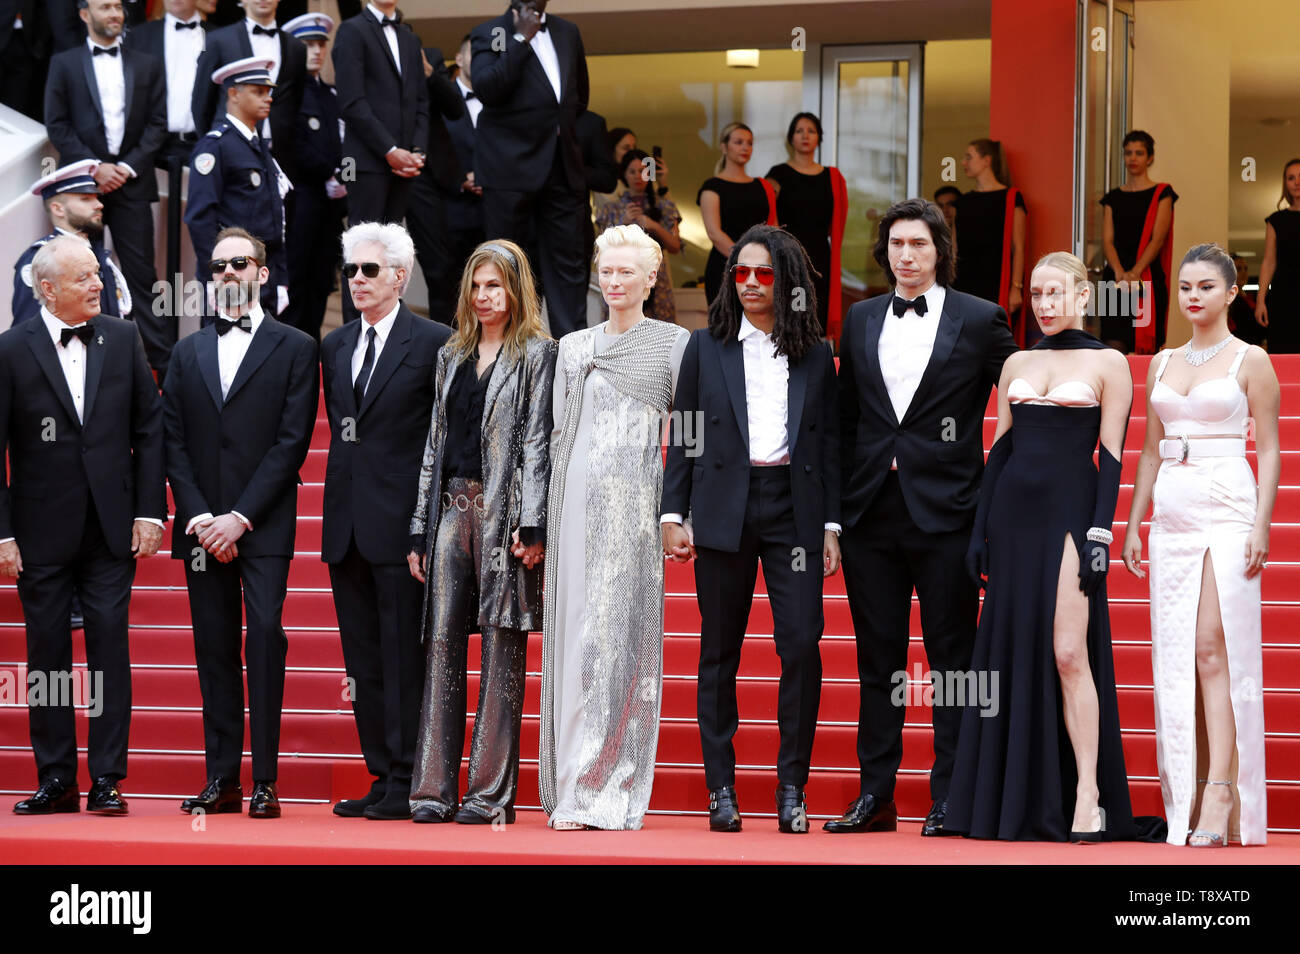 Bill Murray, Carter Logan, Jim Jarmusch, Sara Driver, Tilda Swinton, Luka Sabbat, Adam Driver, Chloe Sevigny and Selena Gomez attending the opening ceremony and screening of 'The Dead Don't Die' during the 72nd Cannes Film Festival at the Palais des Festivals on May 14, 2019 in Cannes, France | usage worldwide Stock Photo